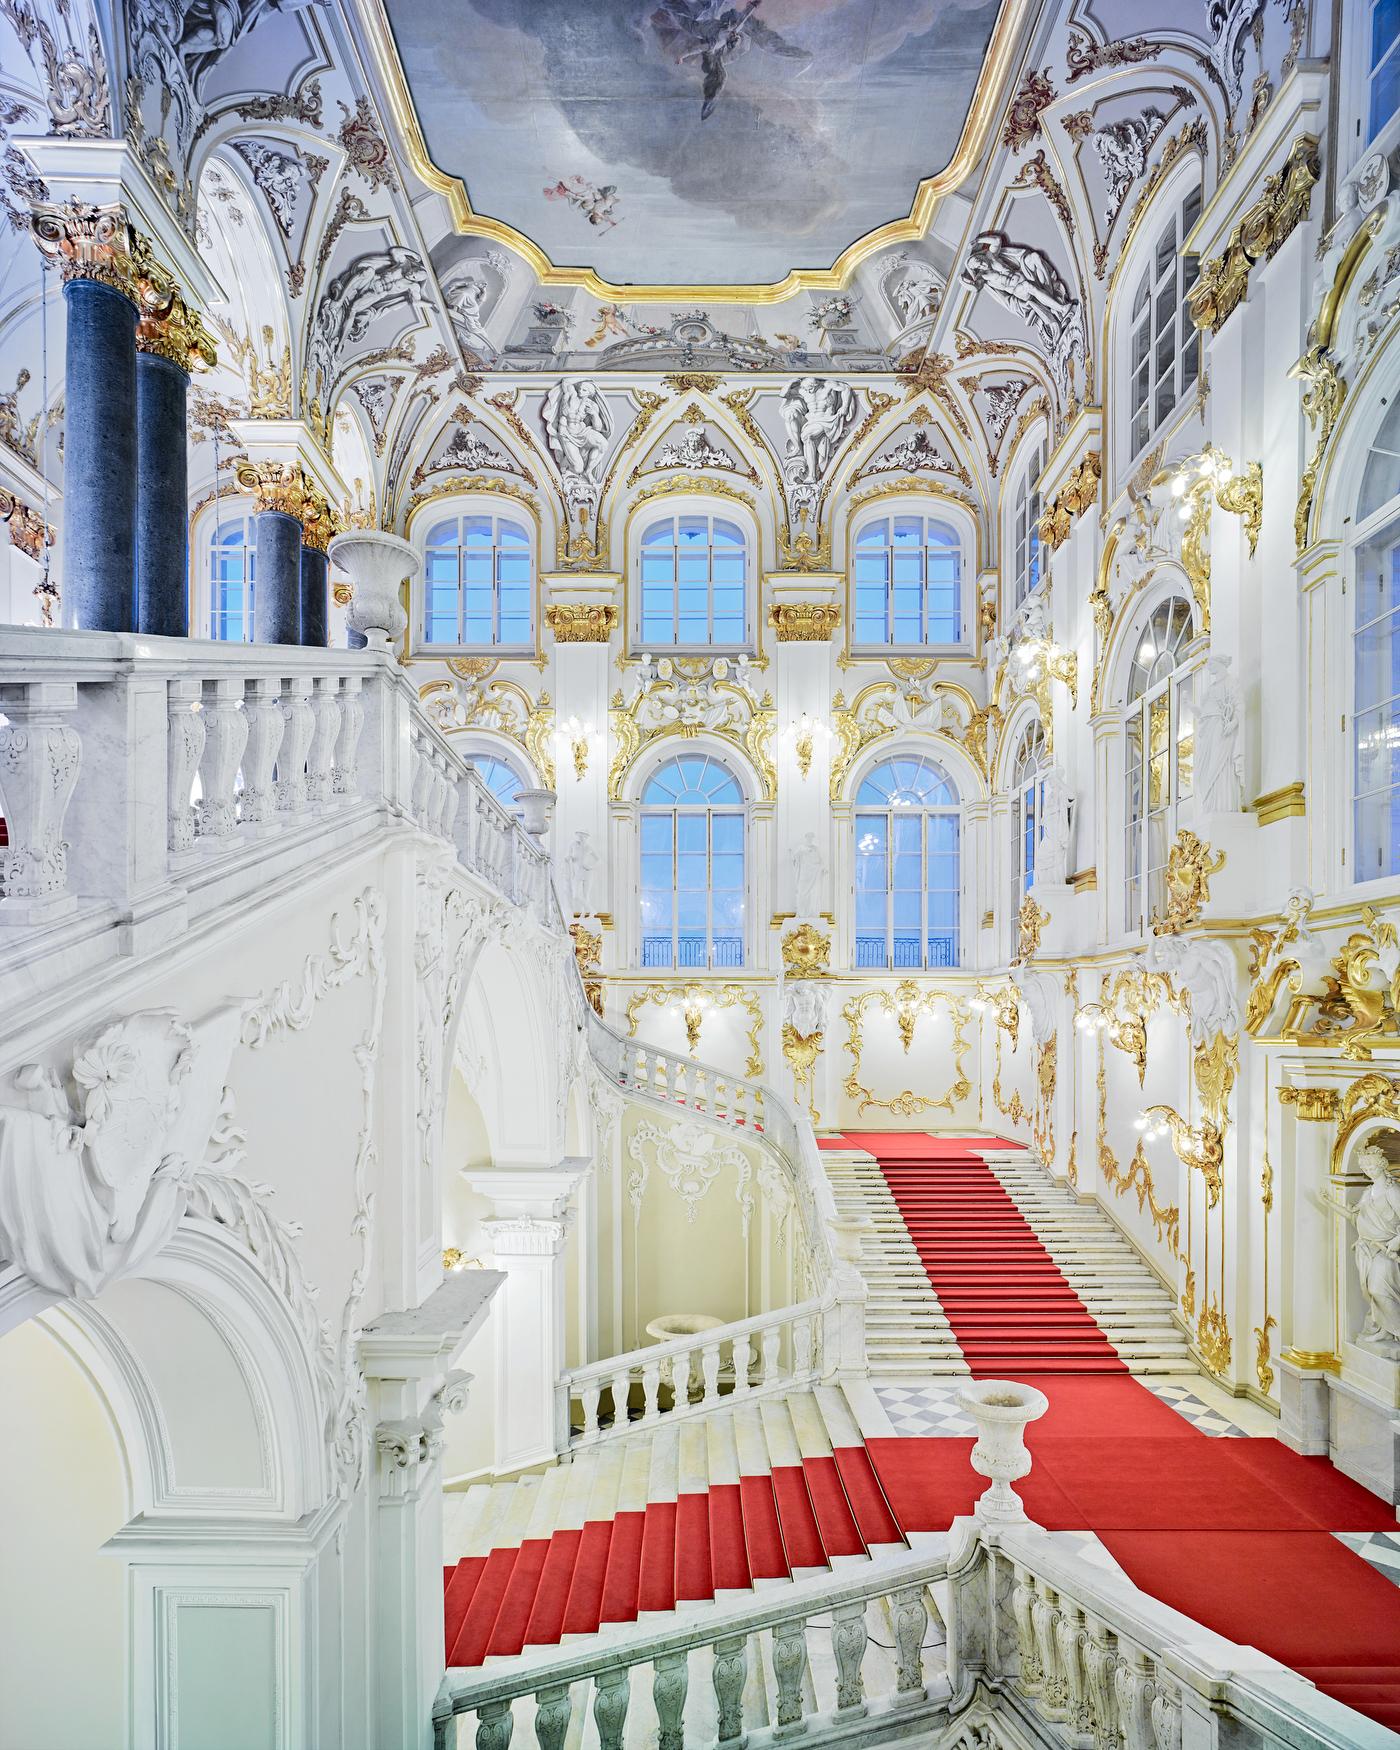 David Burdeny Landscape Photograph - Jordan Stairs I, State Hermitage, St Petersburg, Russia (21” x 26”)